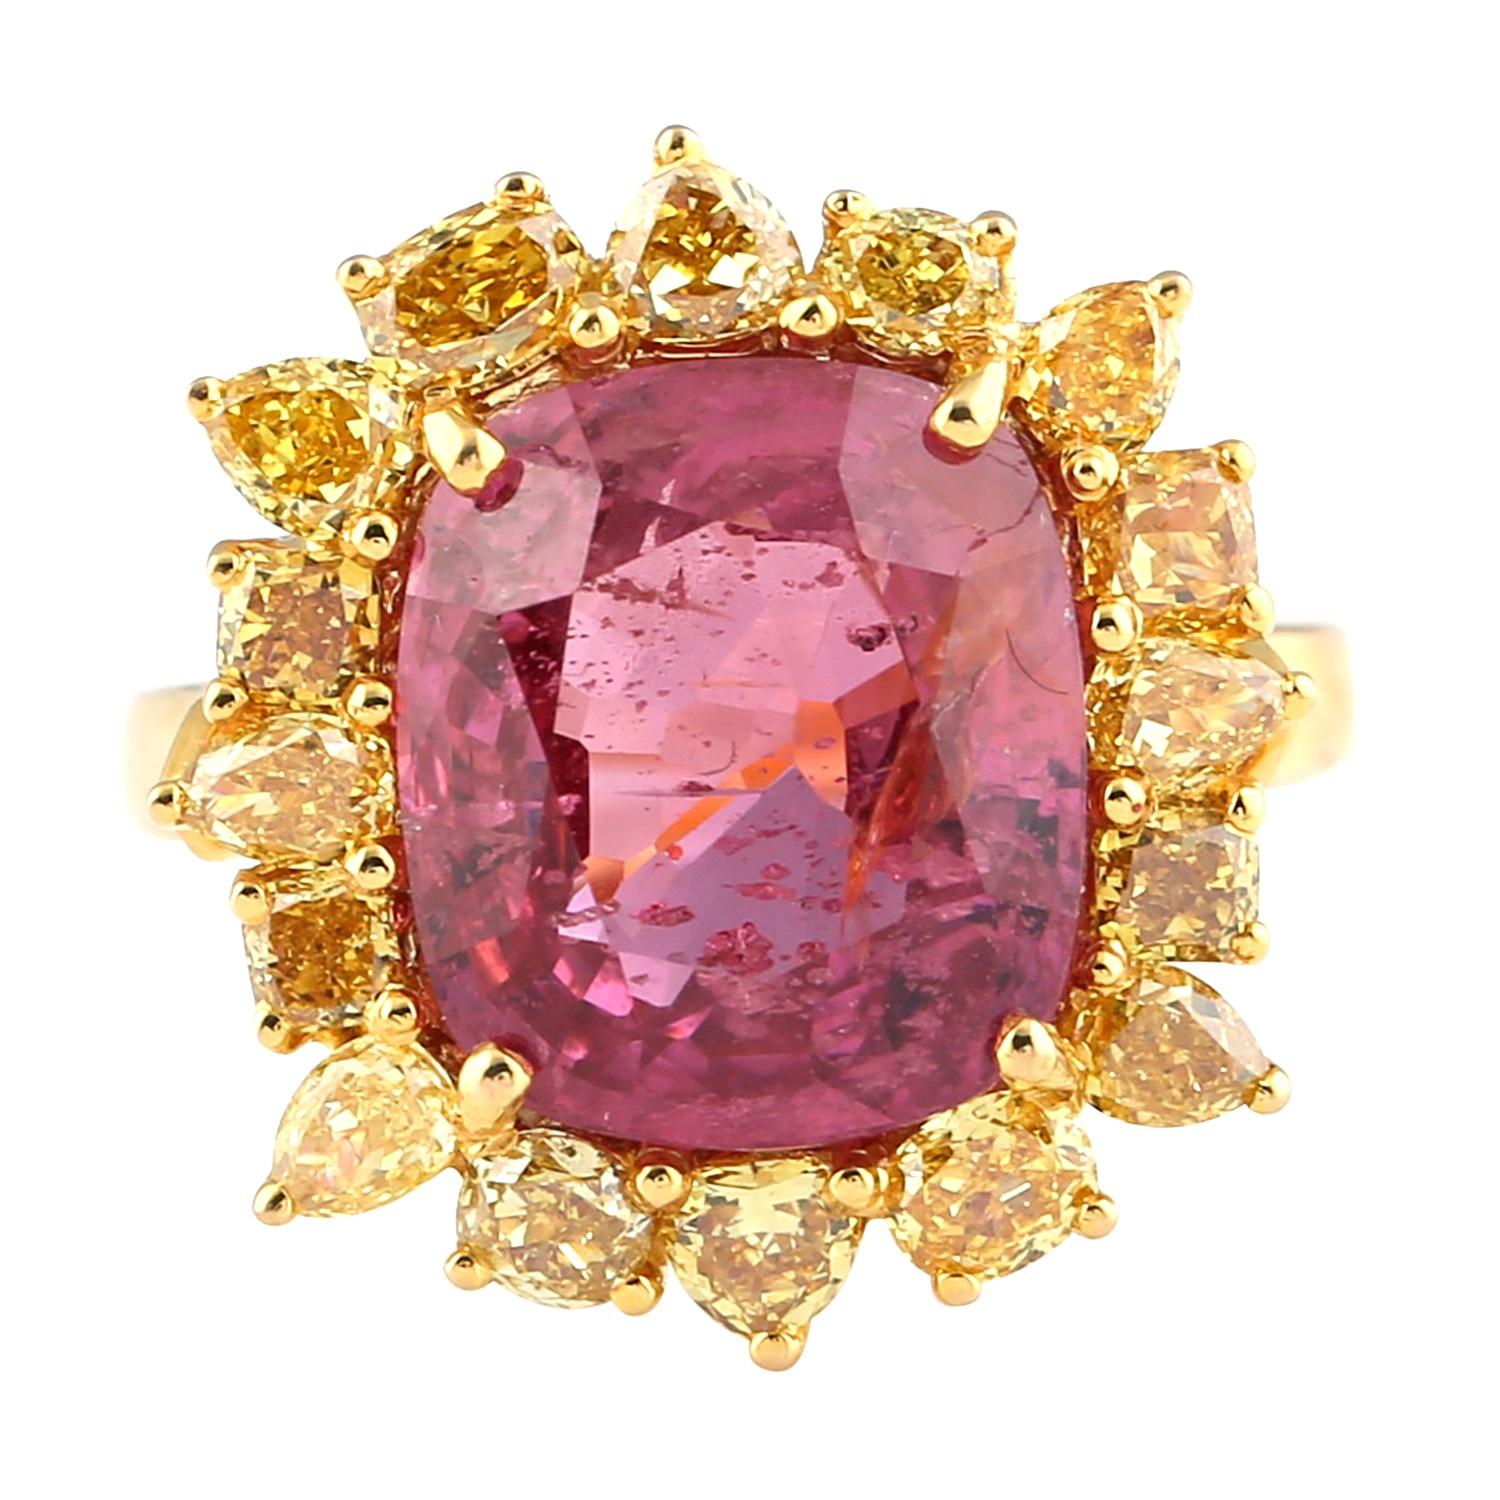 Modernist Red Spinel Ring with Yellow Diamonds in 18 Karat Yellow Gold